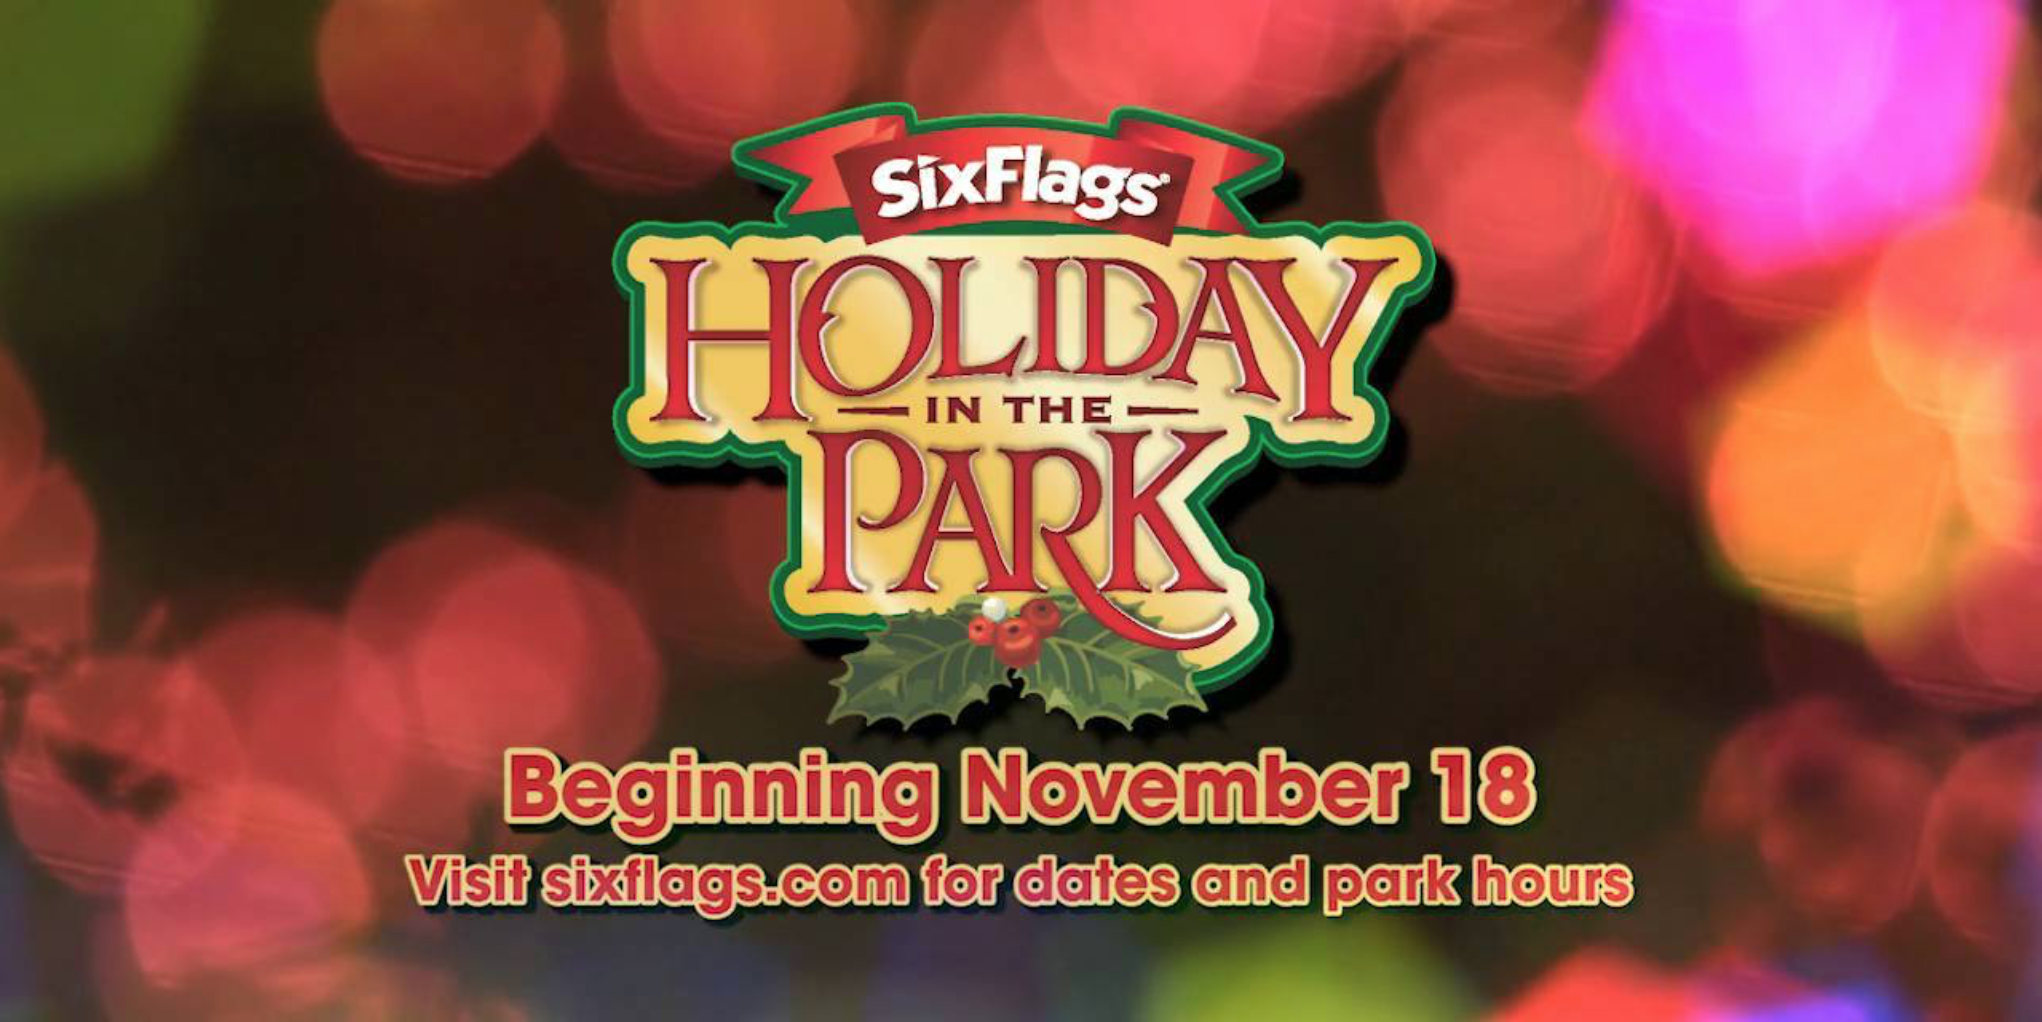 Holiday in the Park® is landing at Six Flags in Jackson, New Jersey